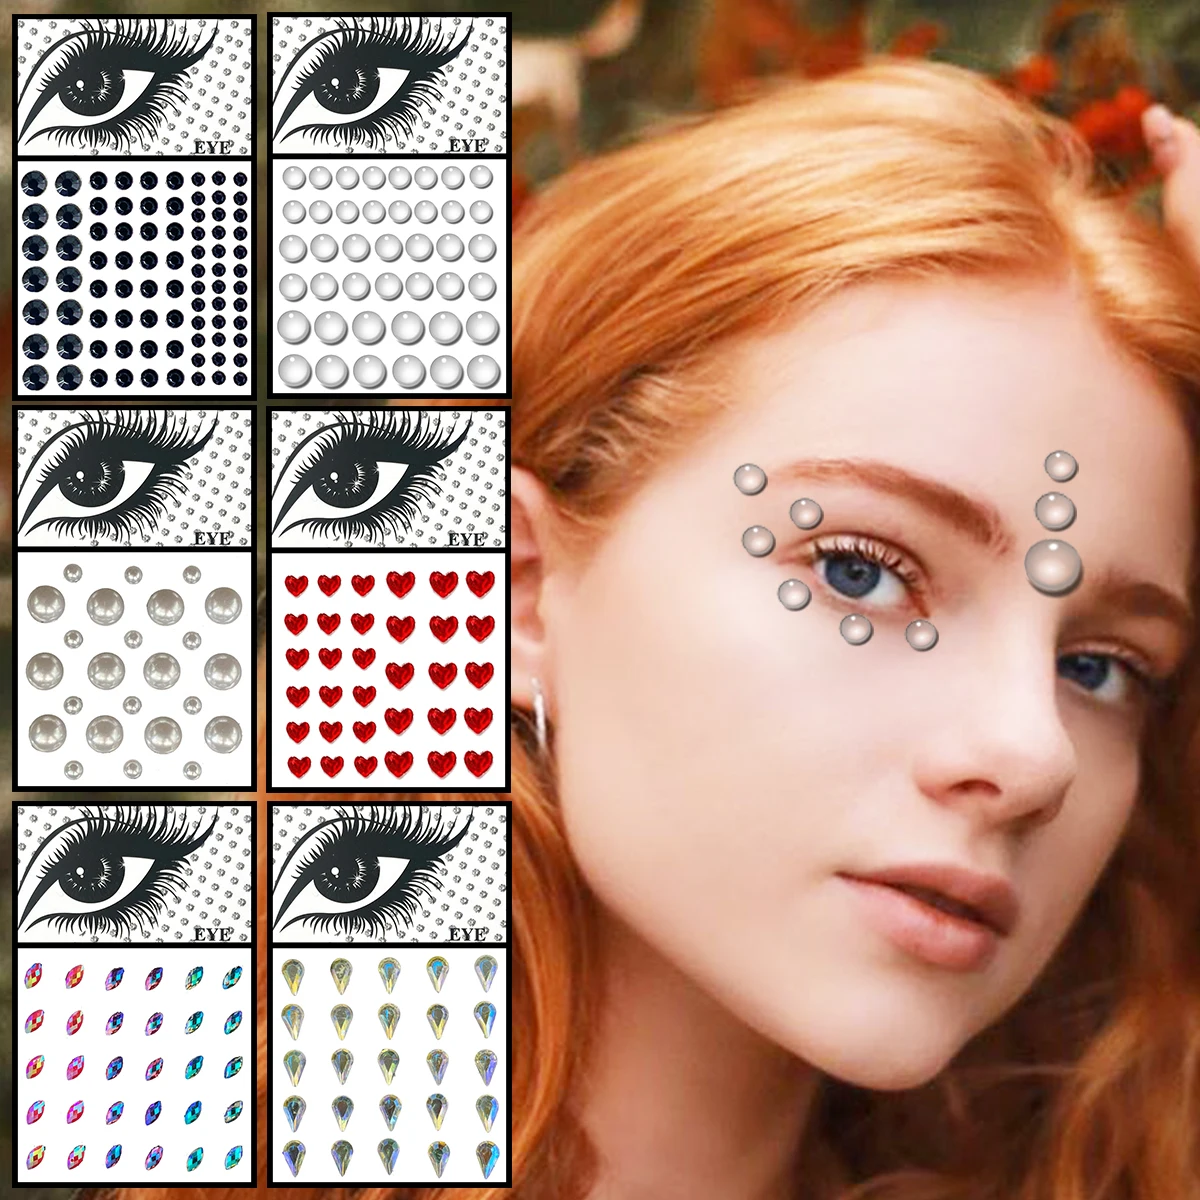 

Heart Face Jewels Temporary Tattoos Eyes Forehead Water Drop Pearl Gems Makeup Sticker Flash Dots Tears Jewelry Halloween Rave